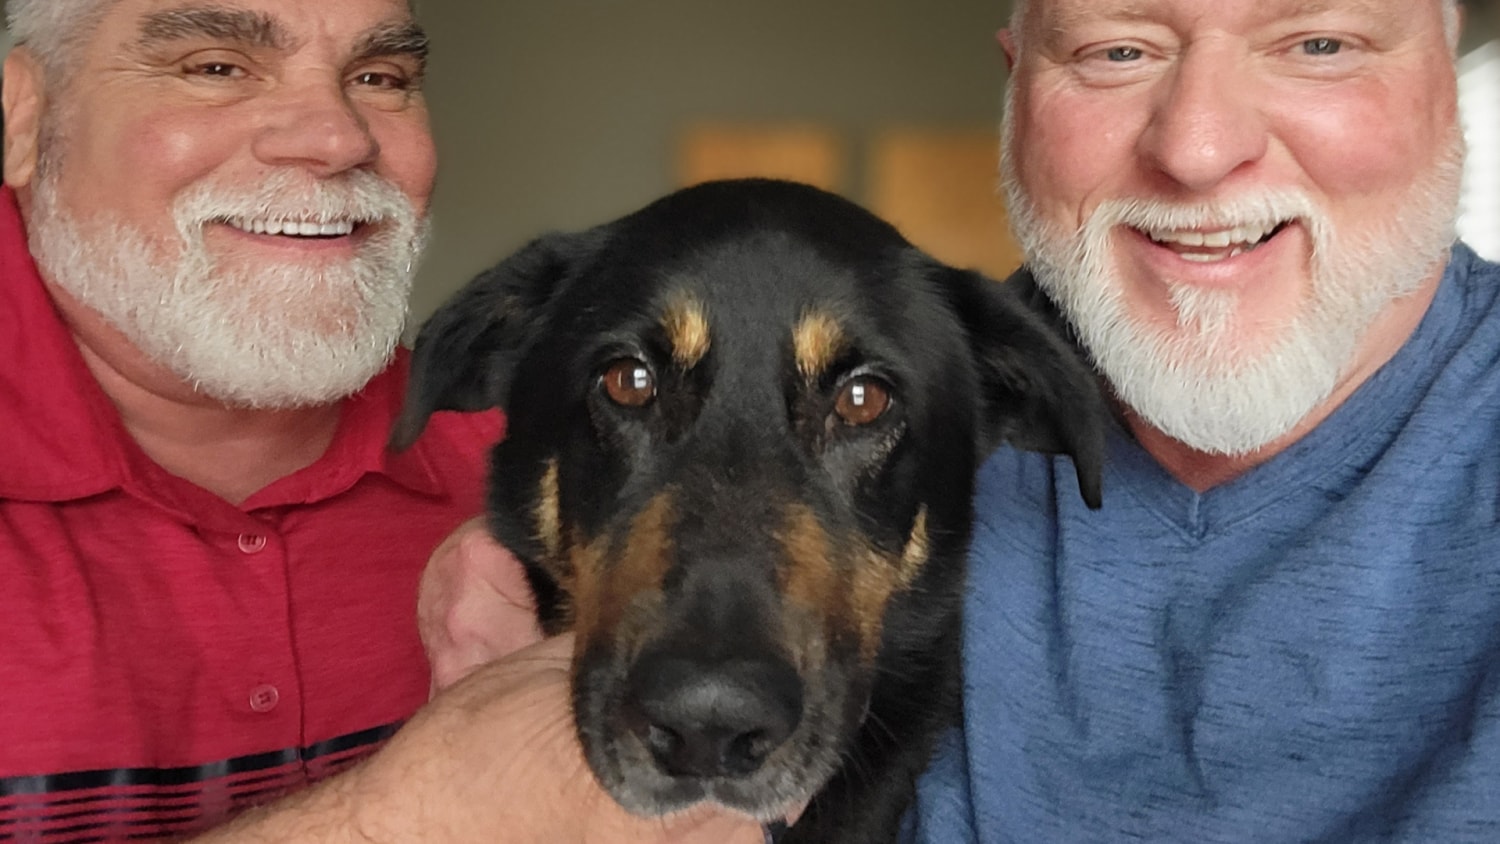 Dog abandoned for being 'gay' is adopted by same-sex couple